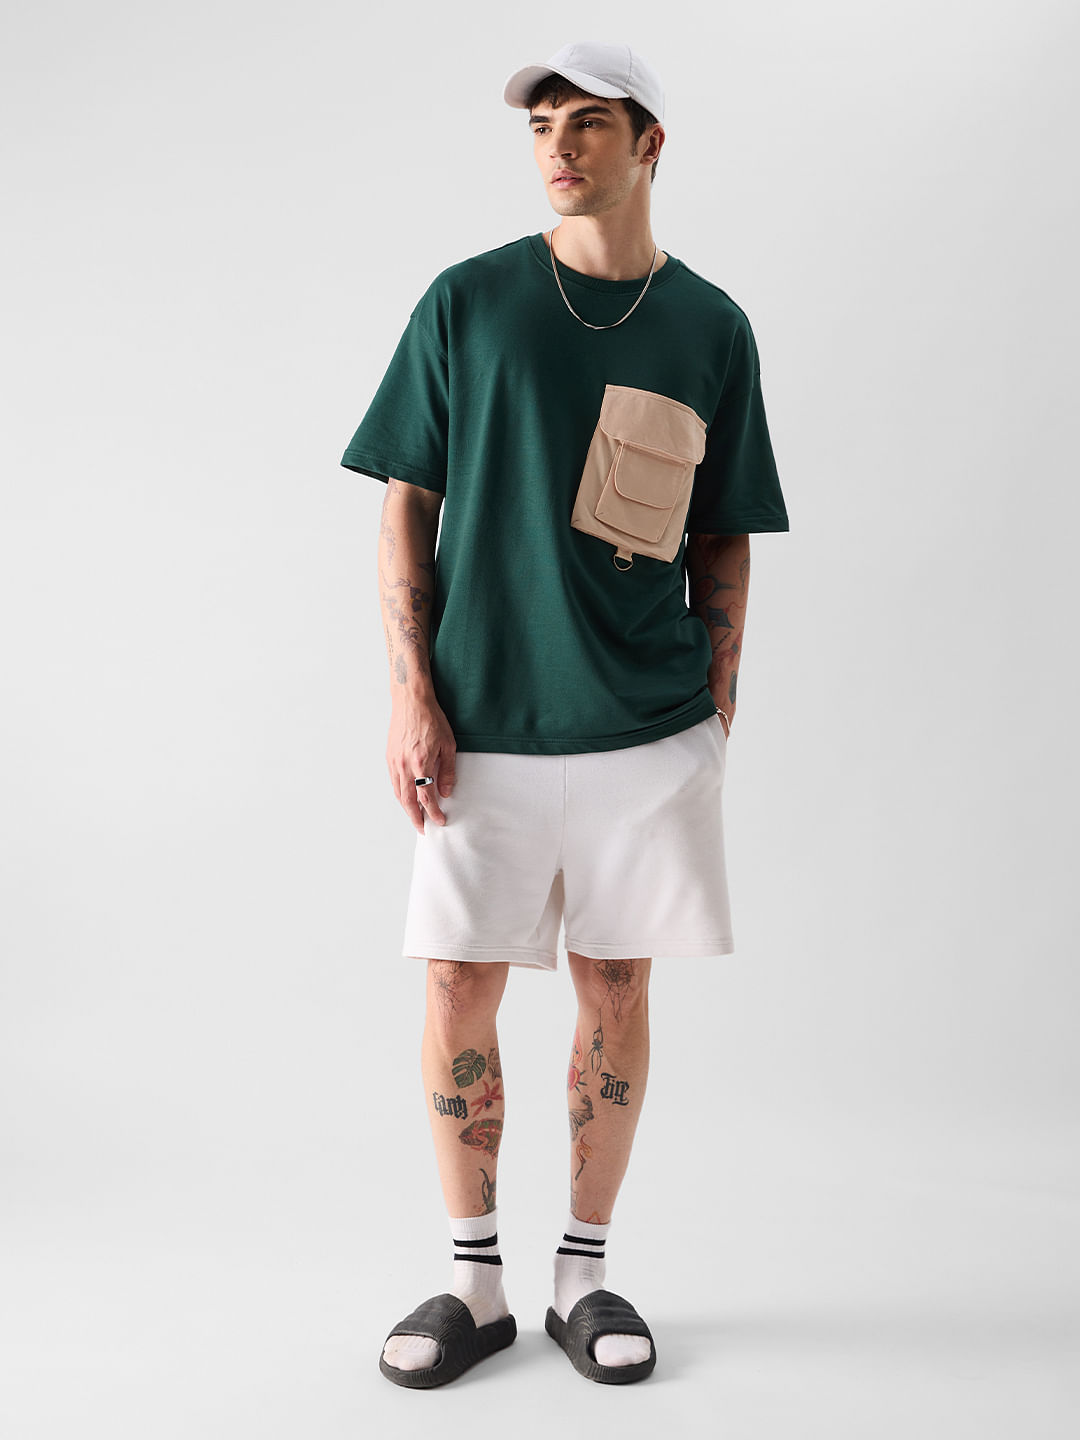 Buy Solids: Green Emerald (Utility) Oversized T-Shirts Online